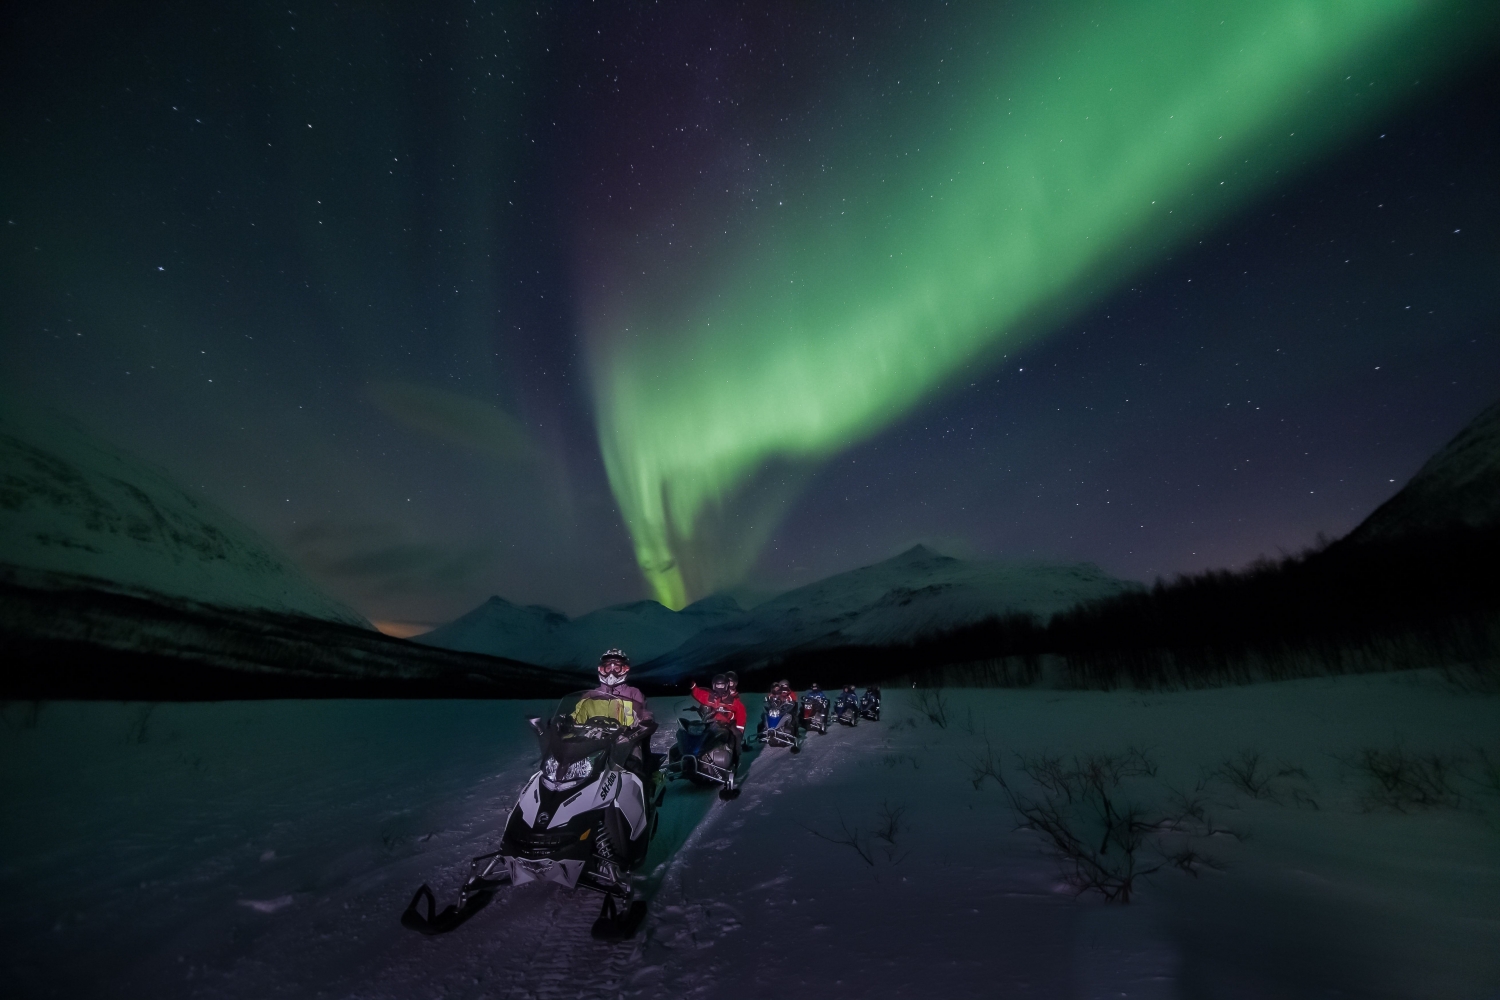 Snowmobile and northern lights